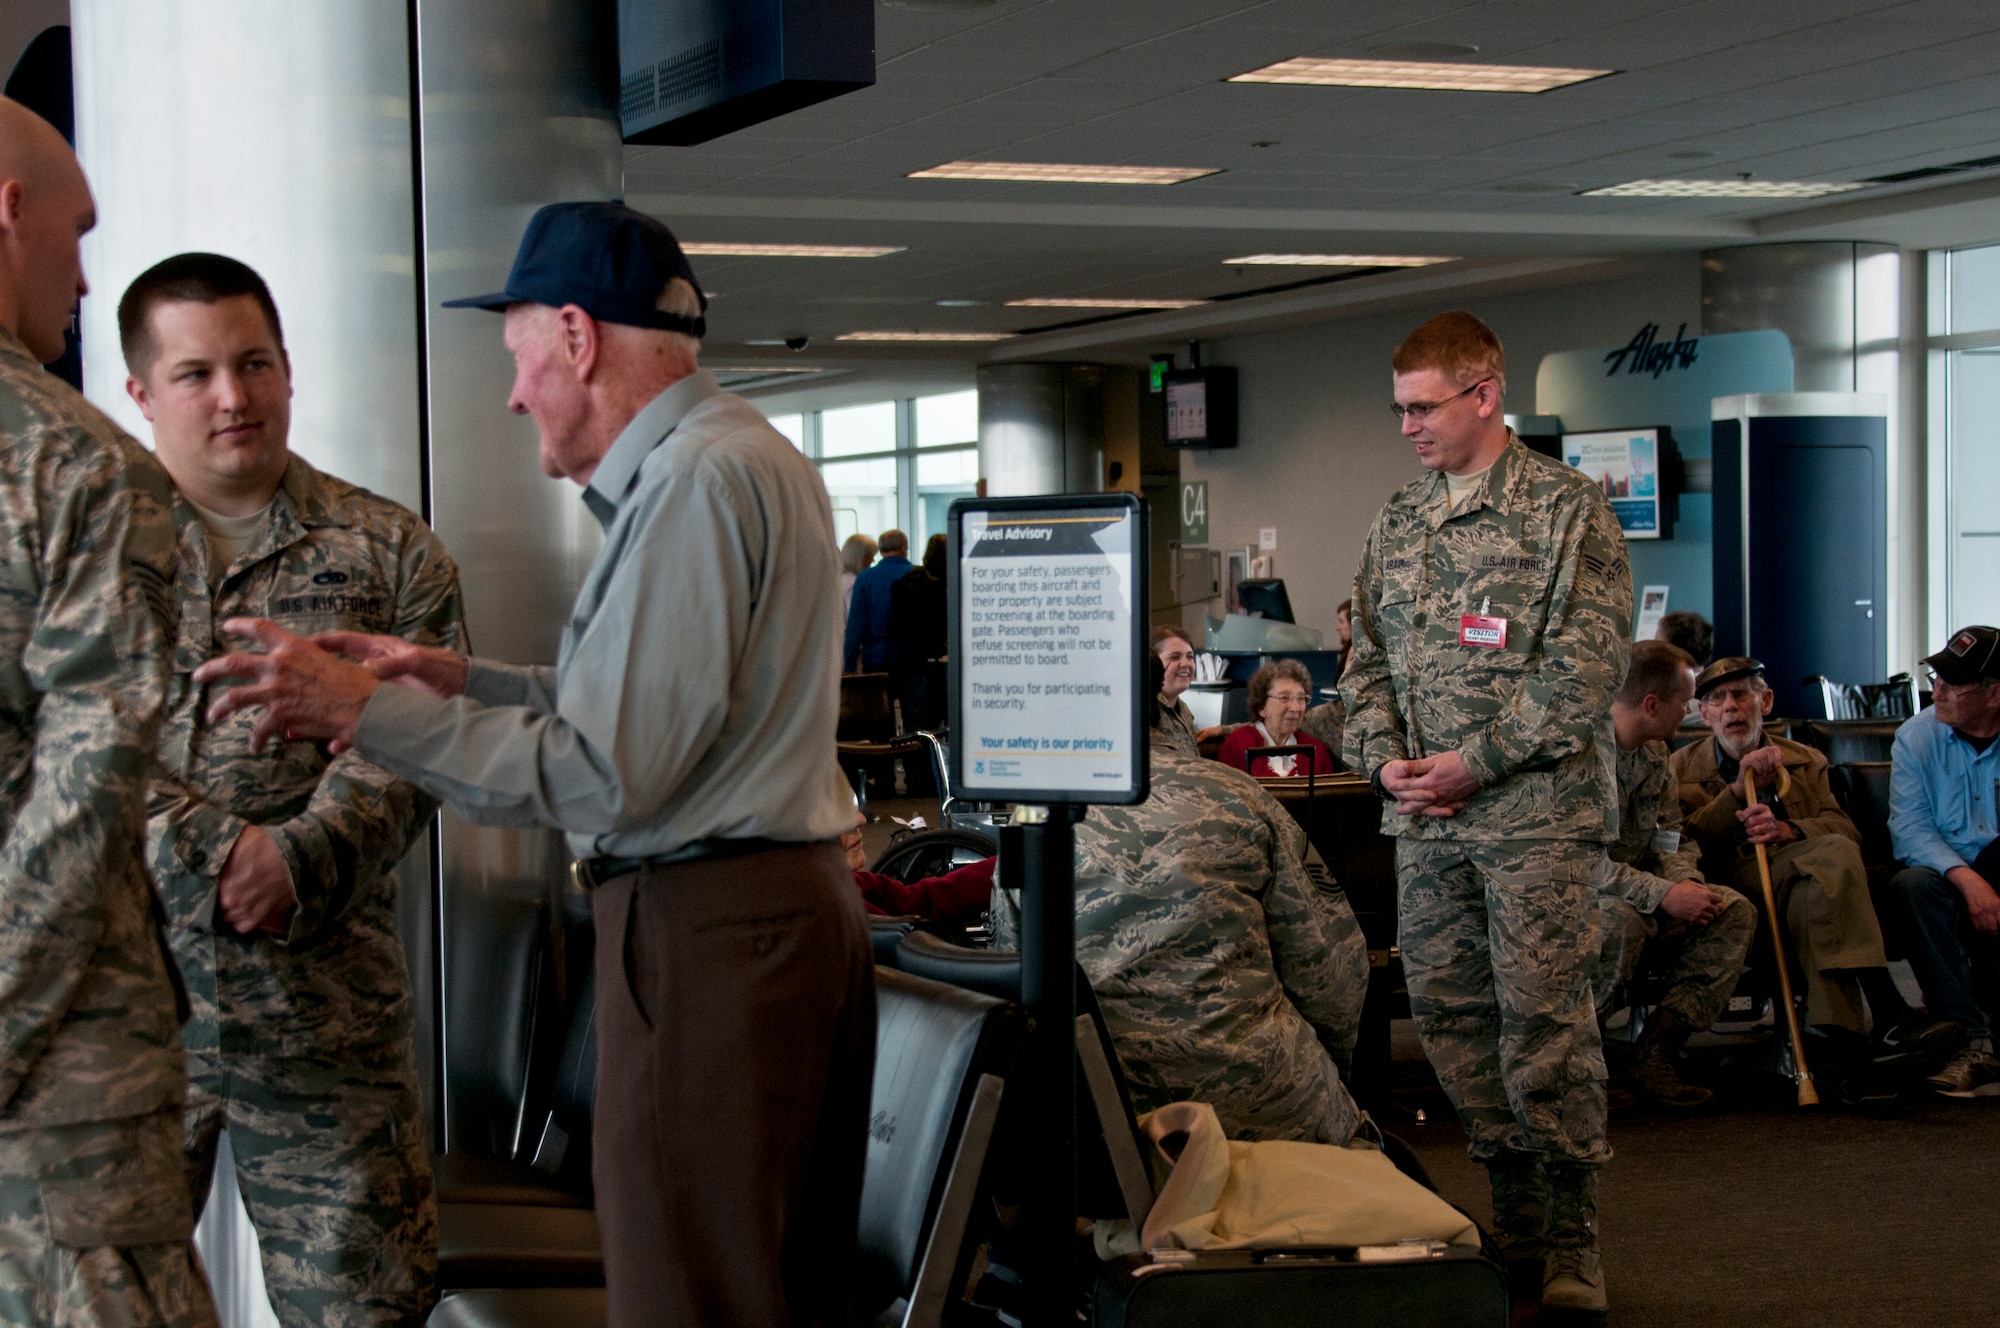 JOINT BASE ELMENDORF-RICHARDSON, Alaska -- About 45 Guardsmen of the Alaska Air National Guard's 176th Wing assisted and interacted with almost 50  World War II veterans at Ted Stevens International Airport on May 6, 2014. The Alaska veterans were on their way to visit their monuments in Washingtion, D.C., for the first time thanks to organizations such as the Golden Heart and Last Frontier Honor Flight programs, and Alaska Airlines, which provided the veterans' tickets. U.S. Air National Guard photo by Staff Sgt N. Alicia Halla/ Released